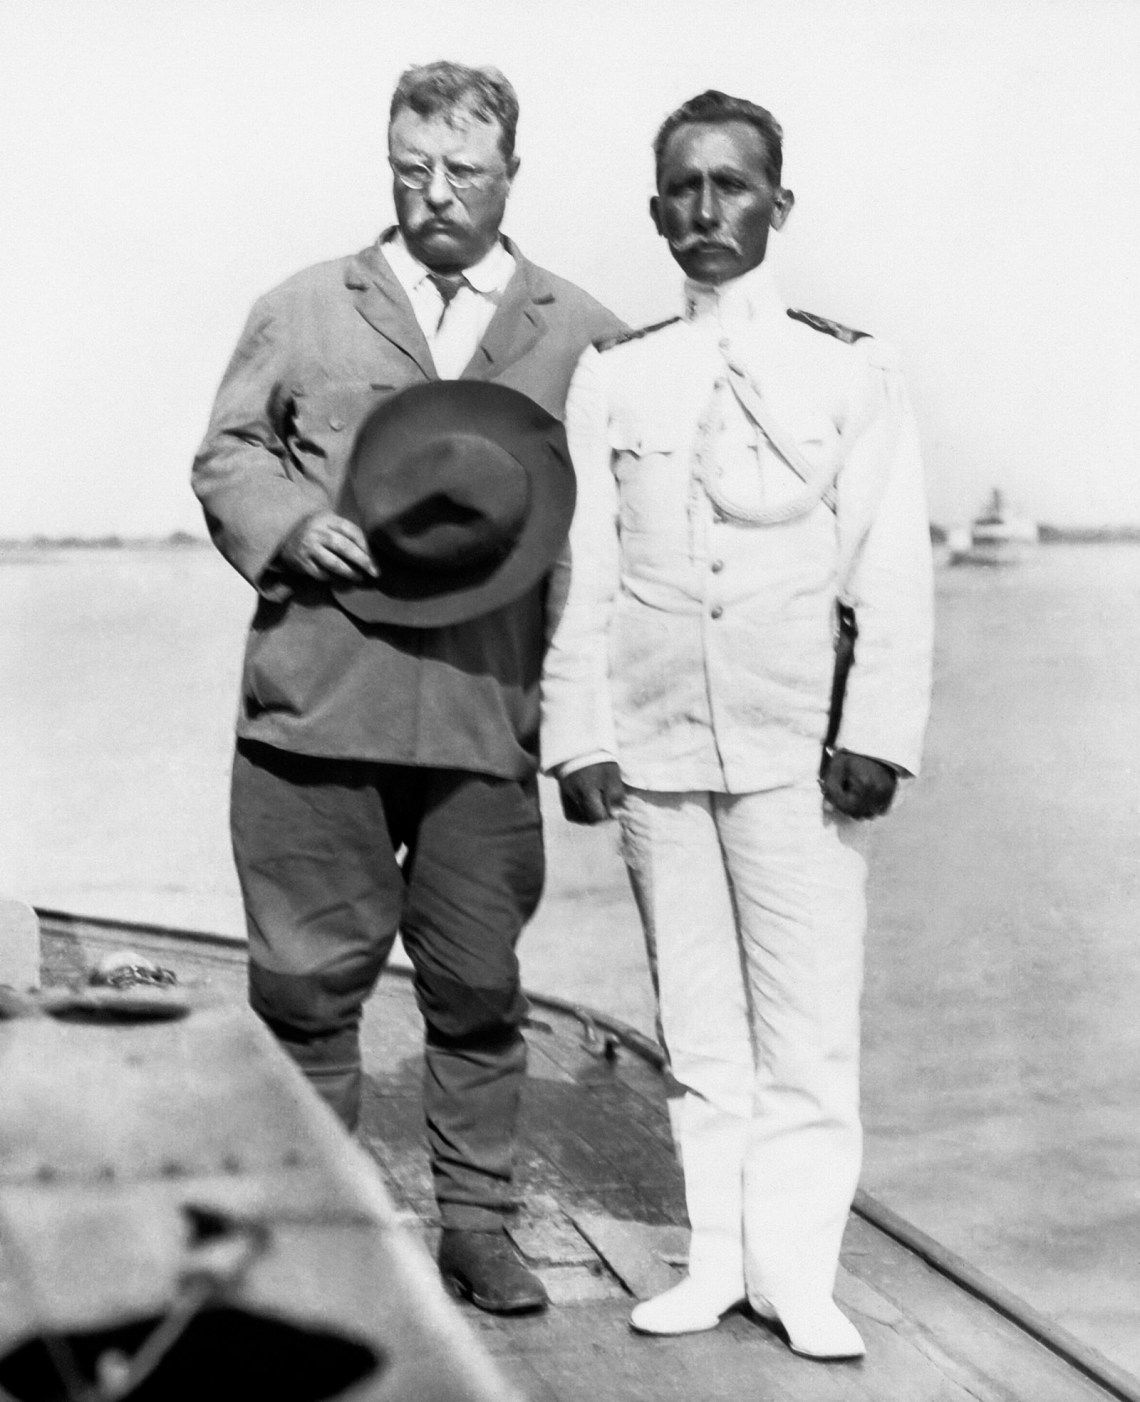 Theodore Roosevelt and Cândido Rondon on the border of Paraguay and Brazil